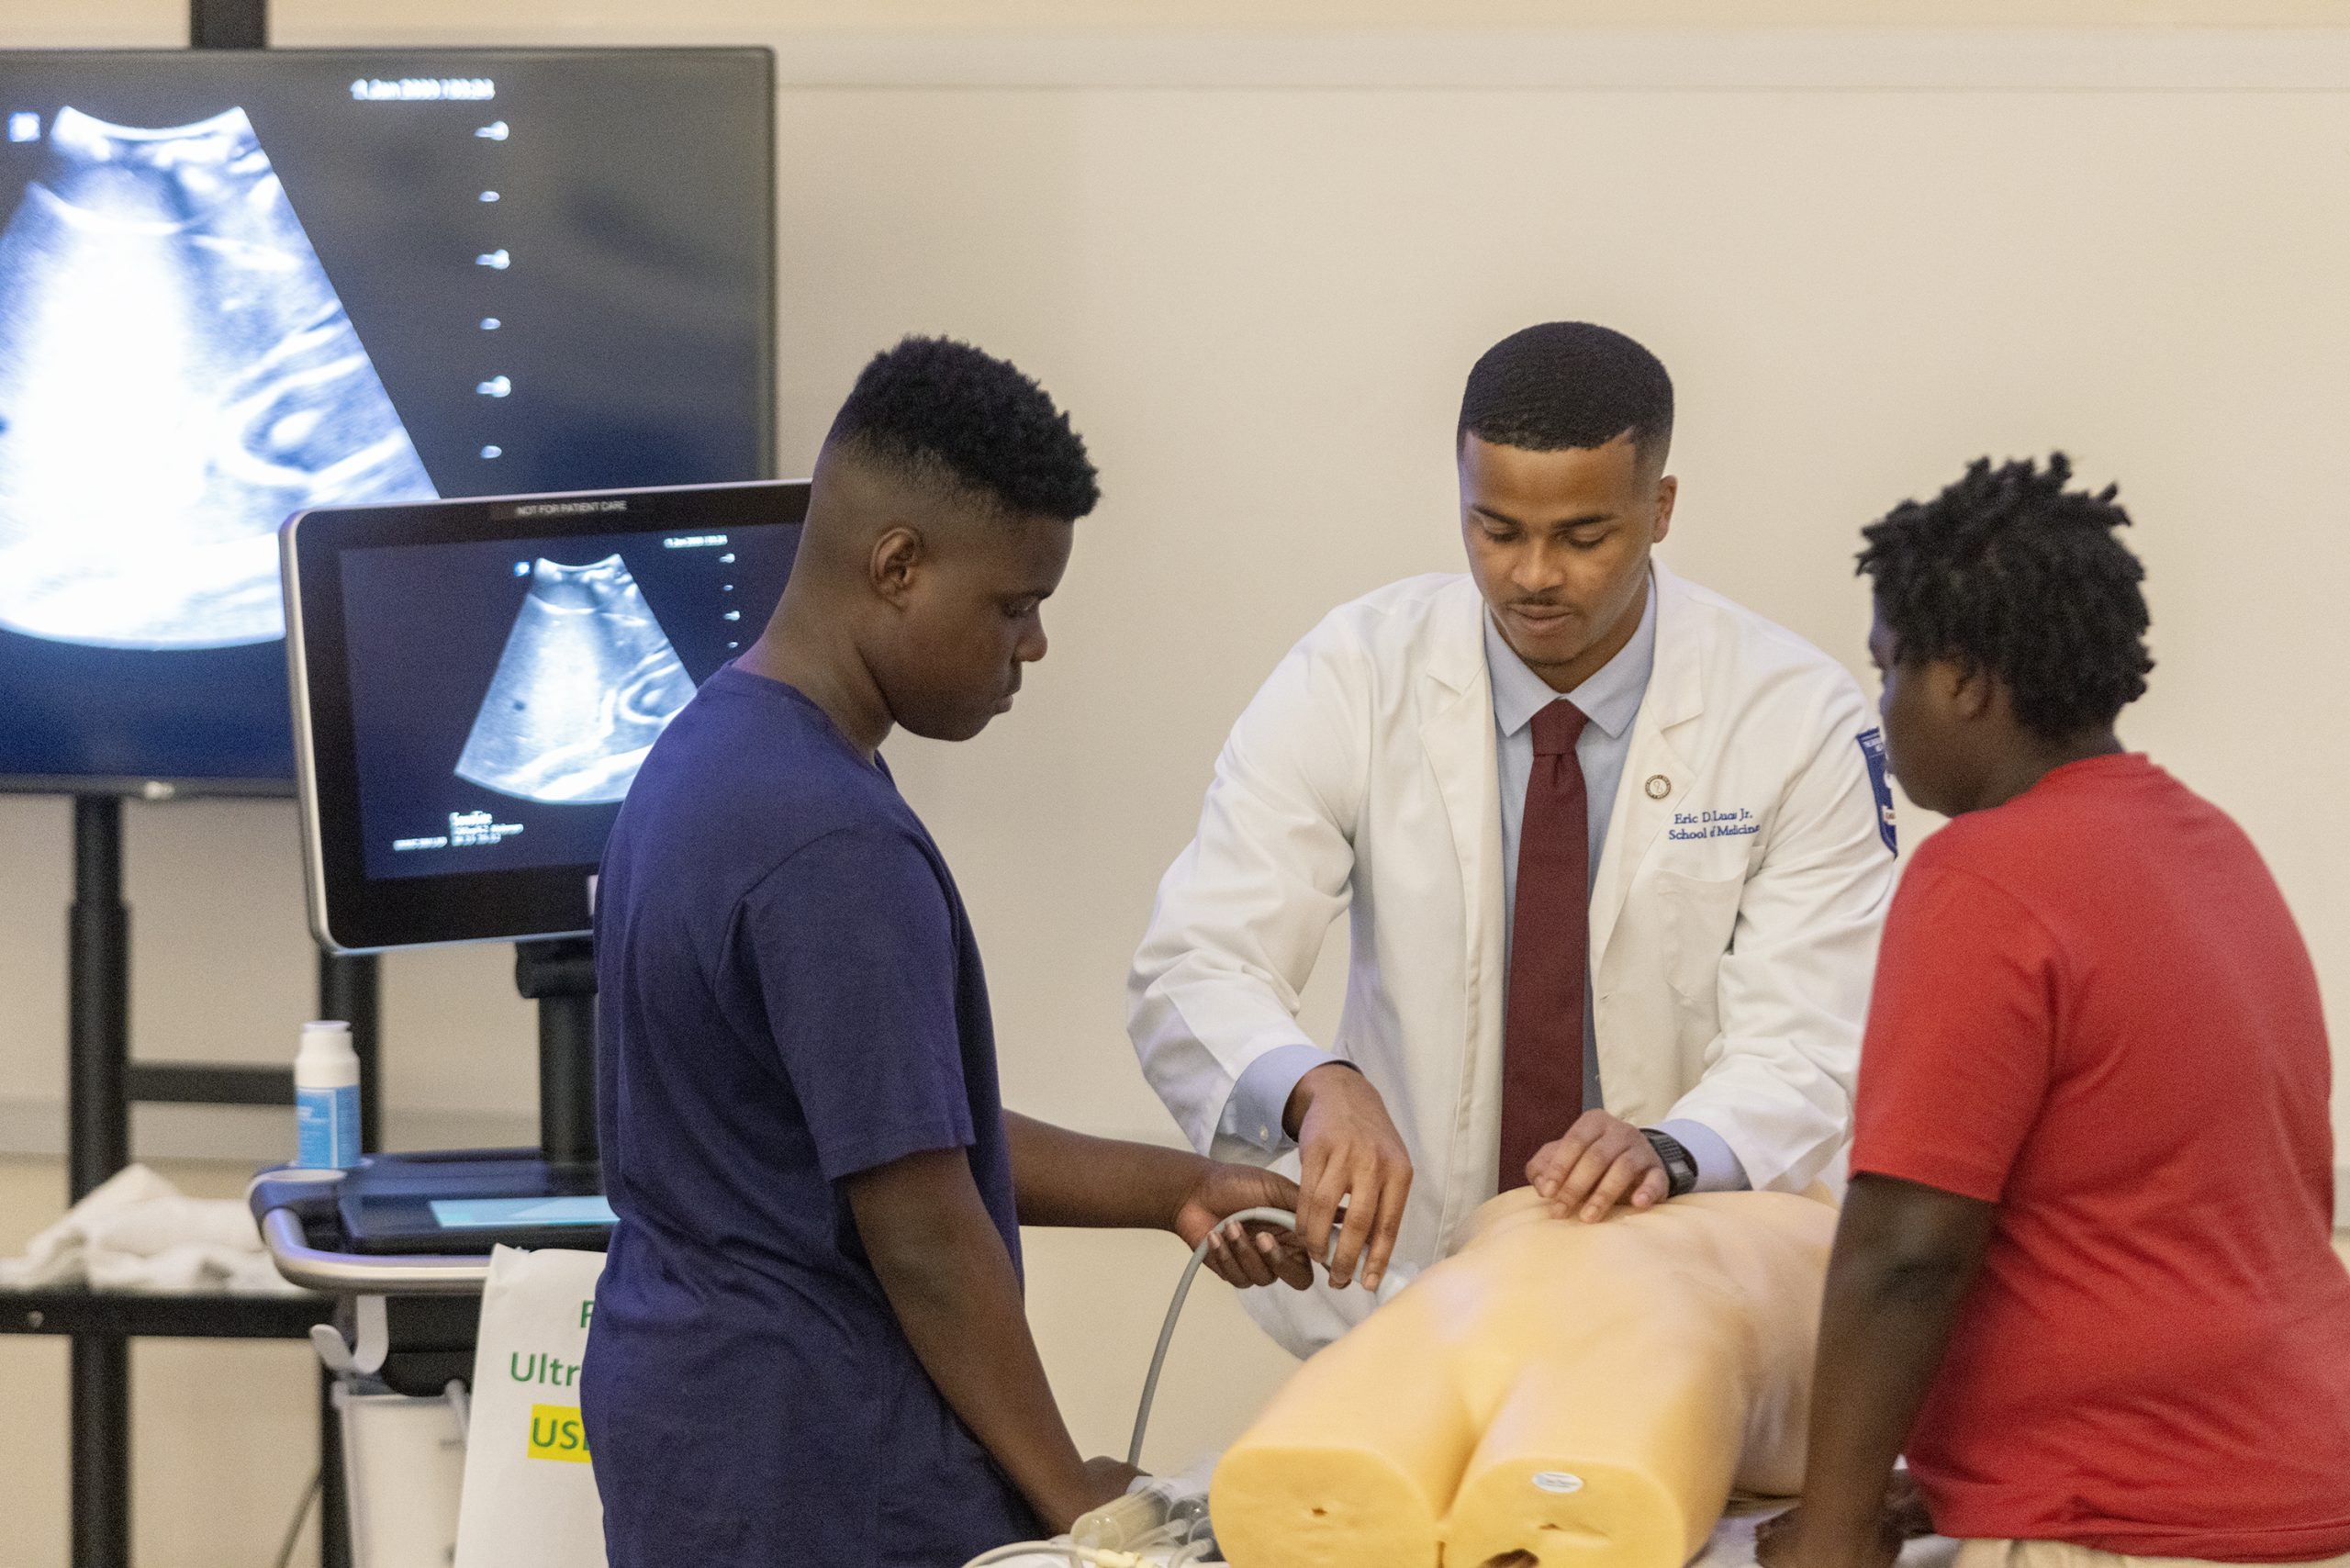 ‘This is where it starts’: UMMC summit aims to increase number of Black men in health care